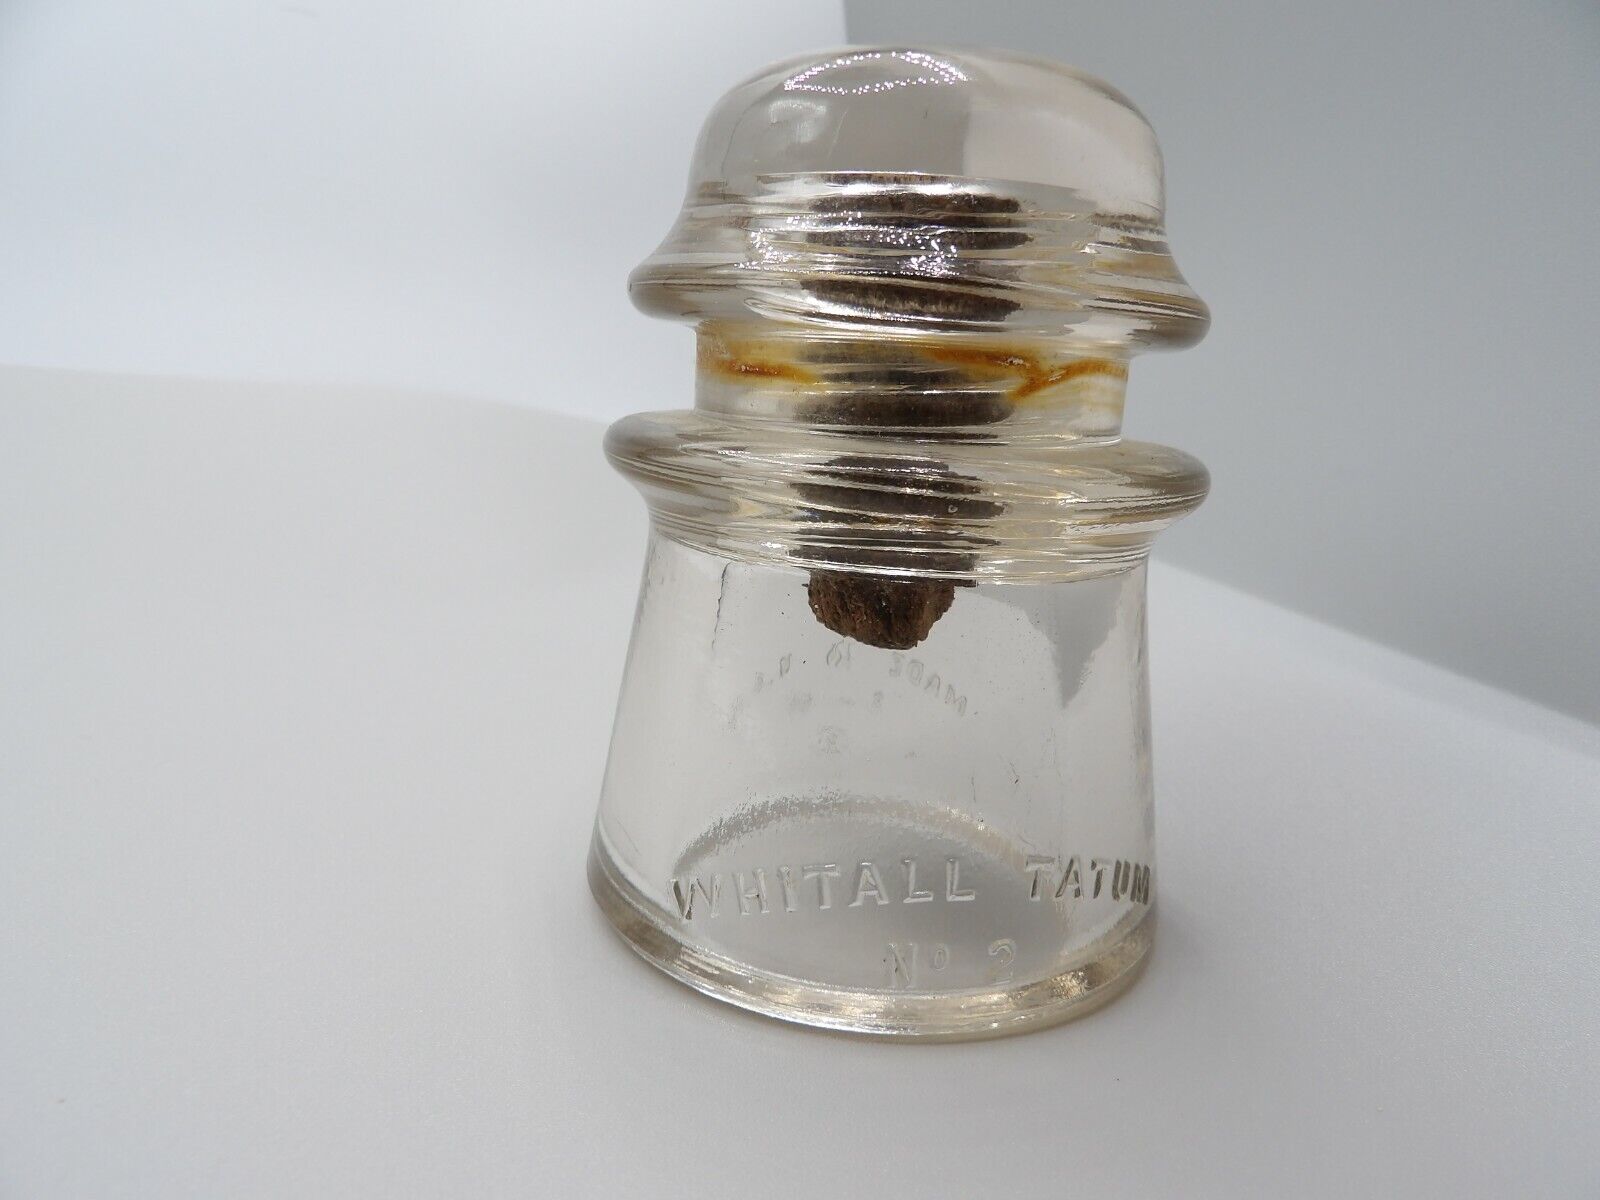 Vintage Whitall Tatum Clear Glass Insulator No 2 (41) Made in USA